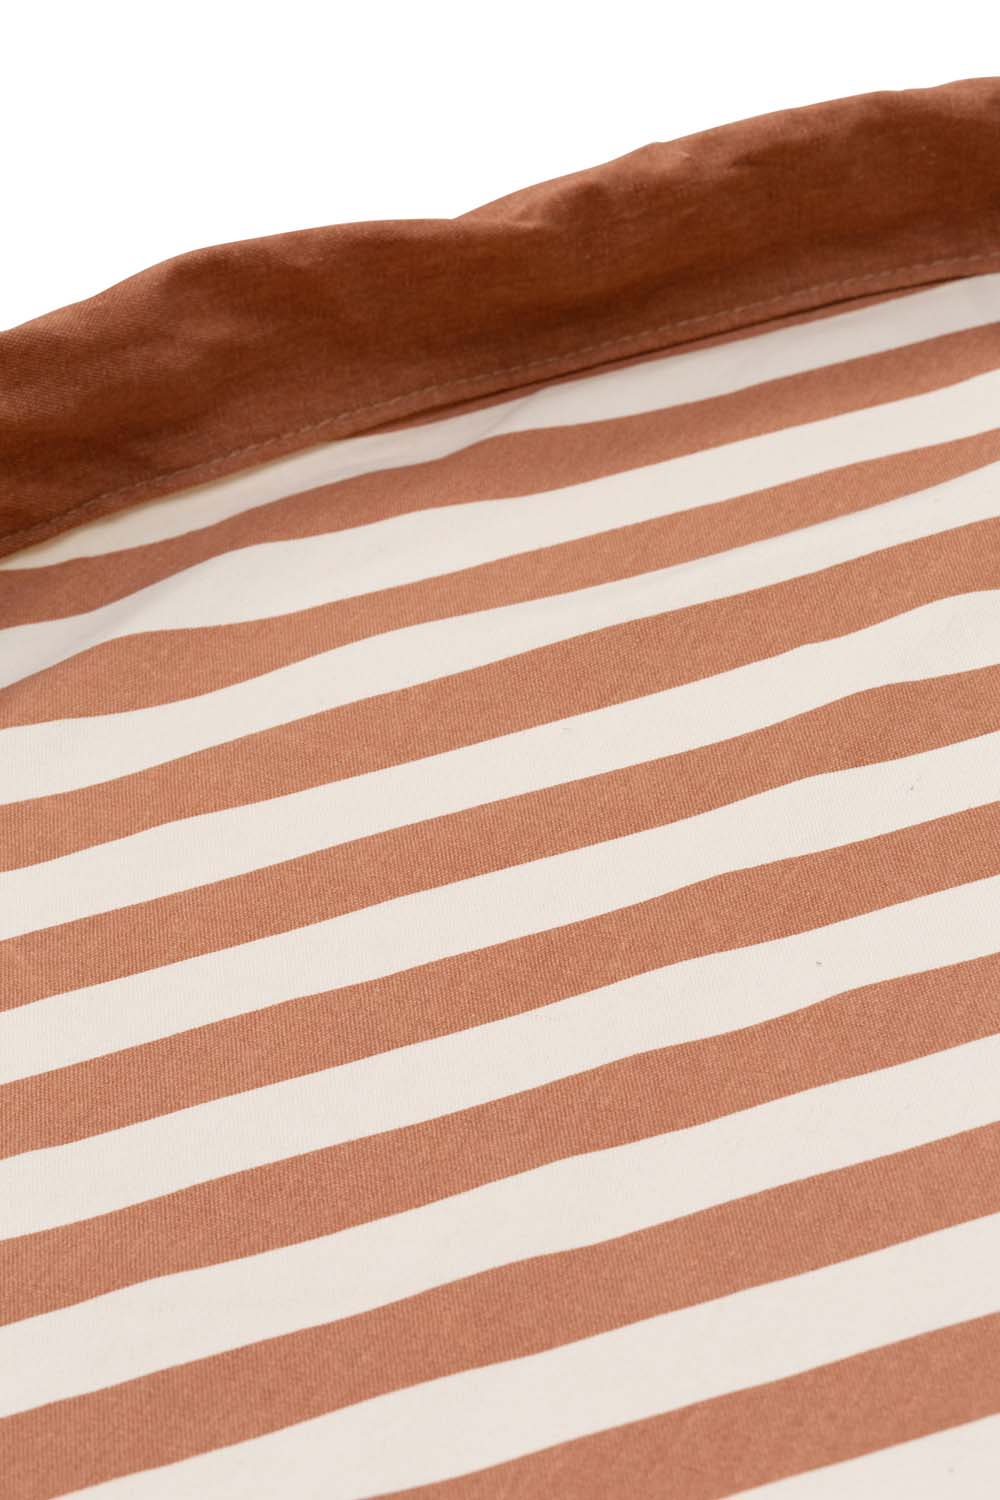 Play & Go | Toy Storage Bag & Play Mat - Brown Stripes